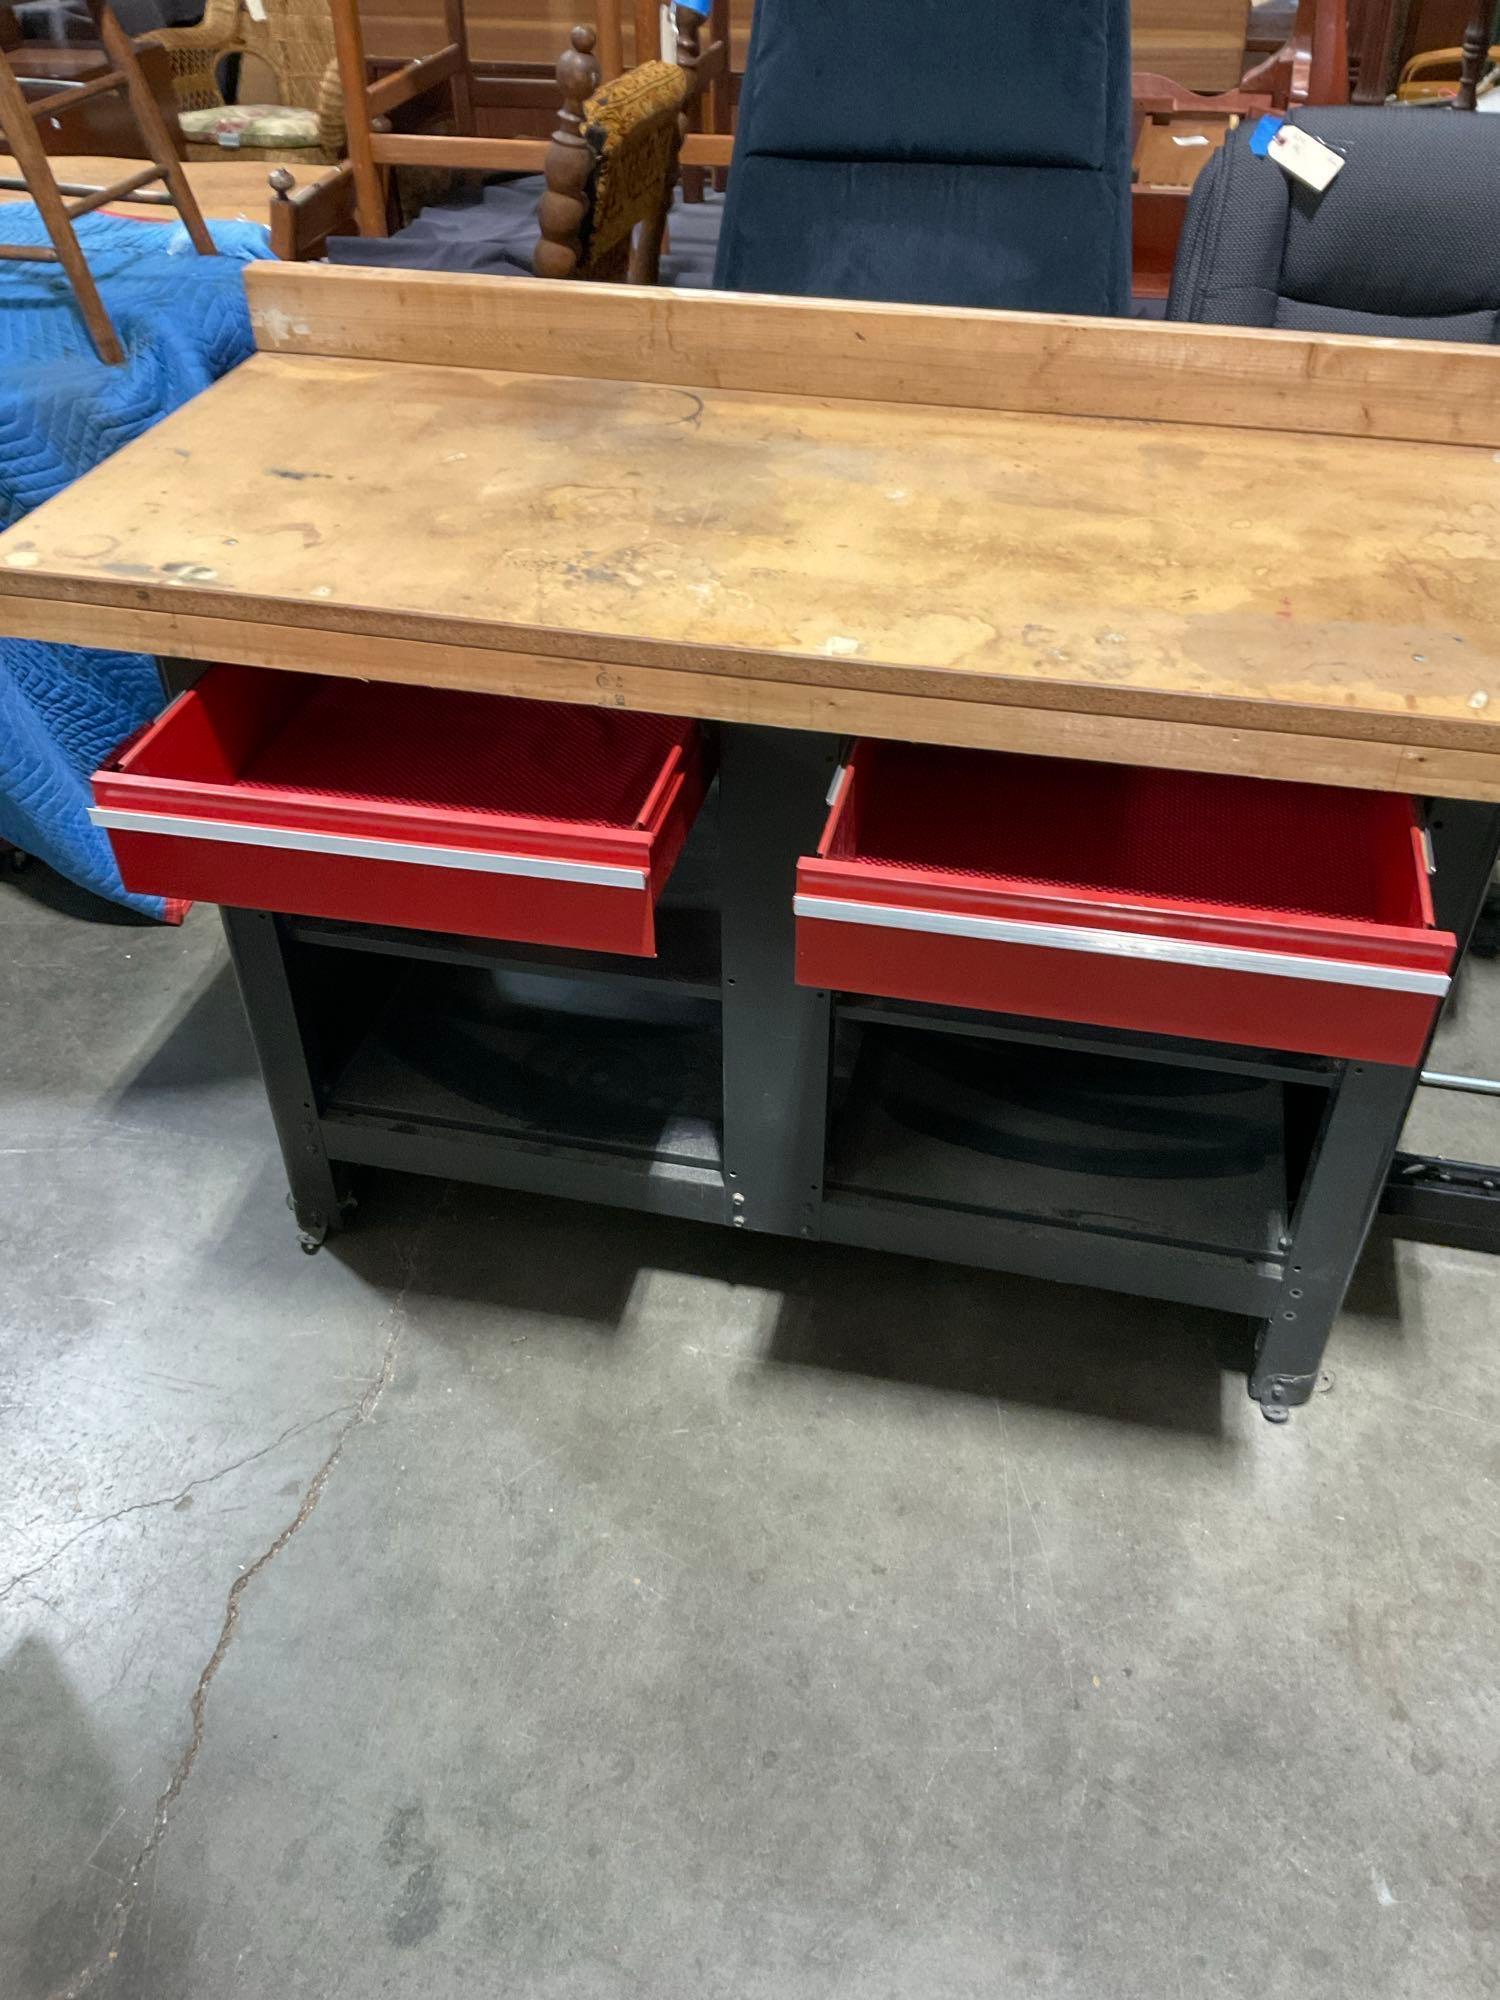 Wooden Work Bench w/ Metal Framing, Drawers & Cubby's - See pics